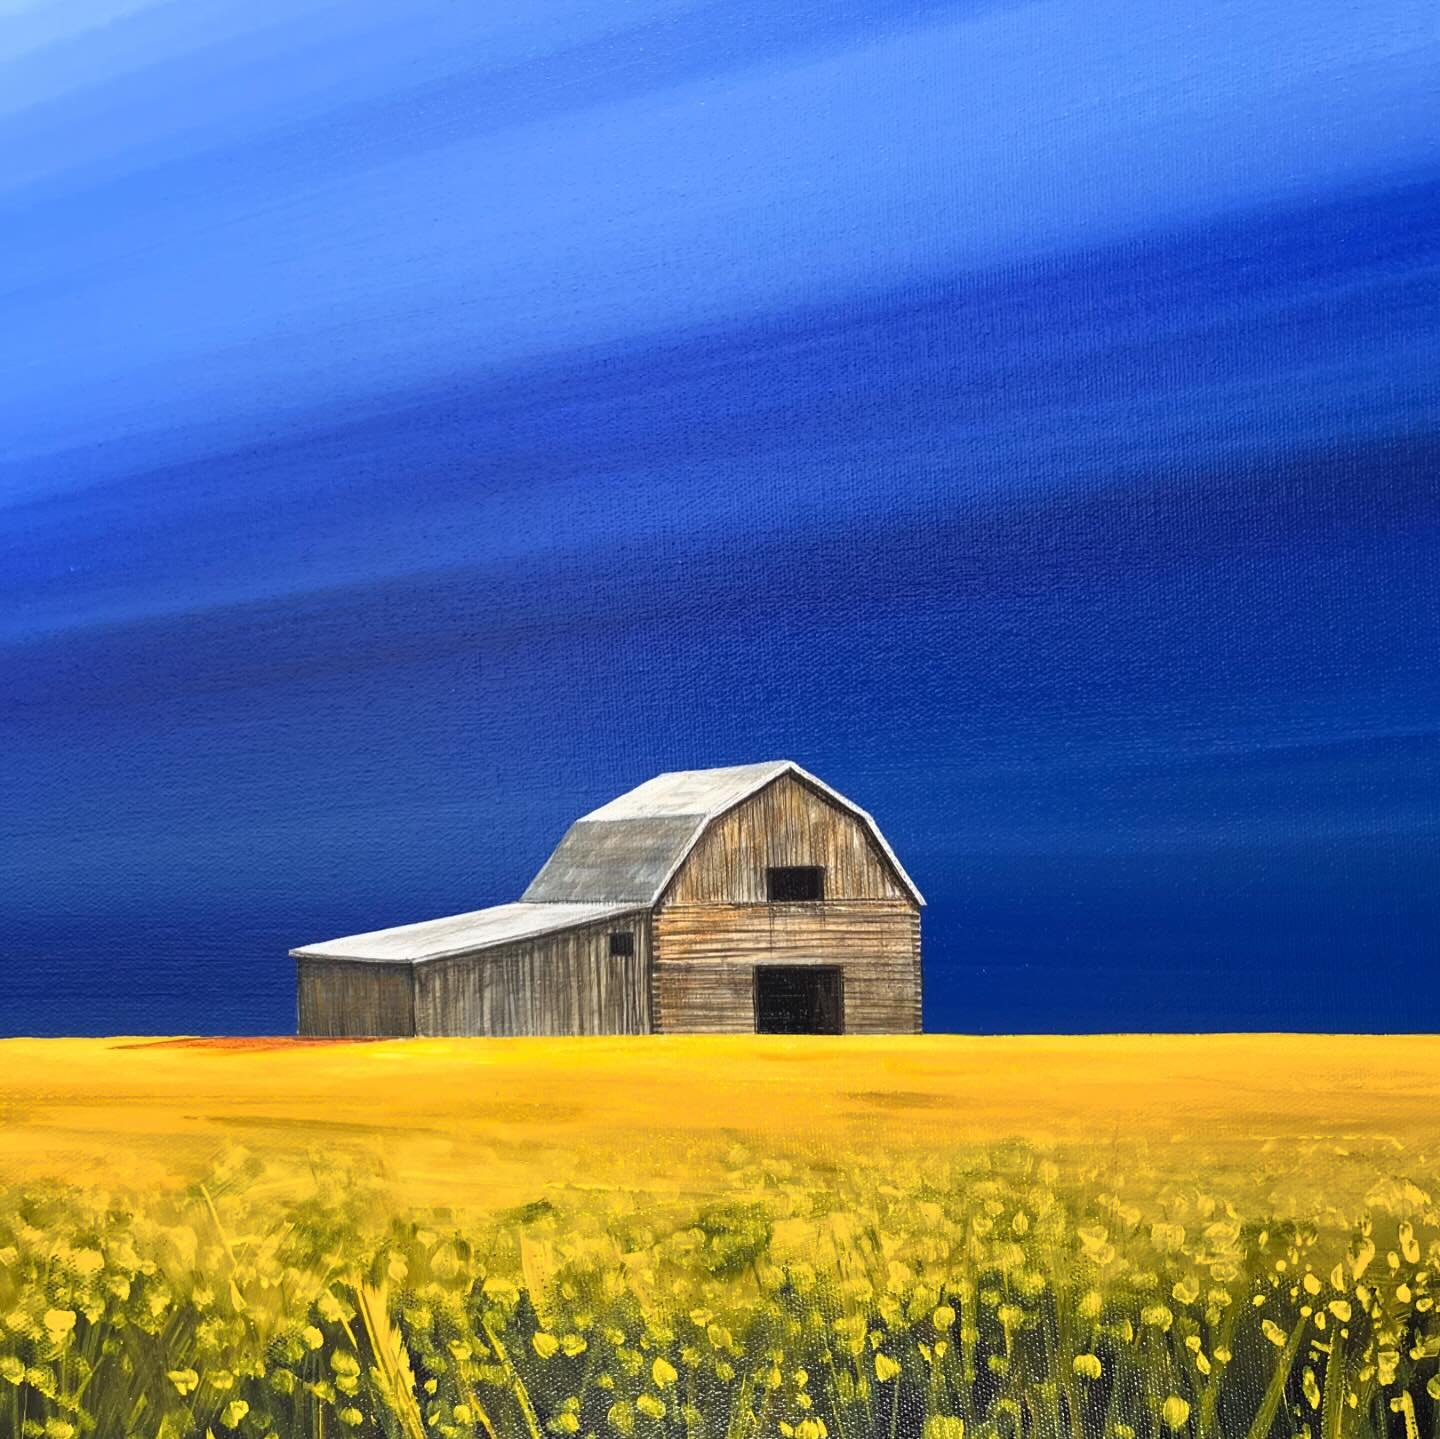 &ldquo;Standing the Test of Time&rdquo; is one of my latest pieces that is available at @avensgallery. The combination of weathered wood and bold, contrasting crops and sky makes this piece stand out! 

#albertastorms #saskatchewanagriculture #oldbar